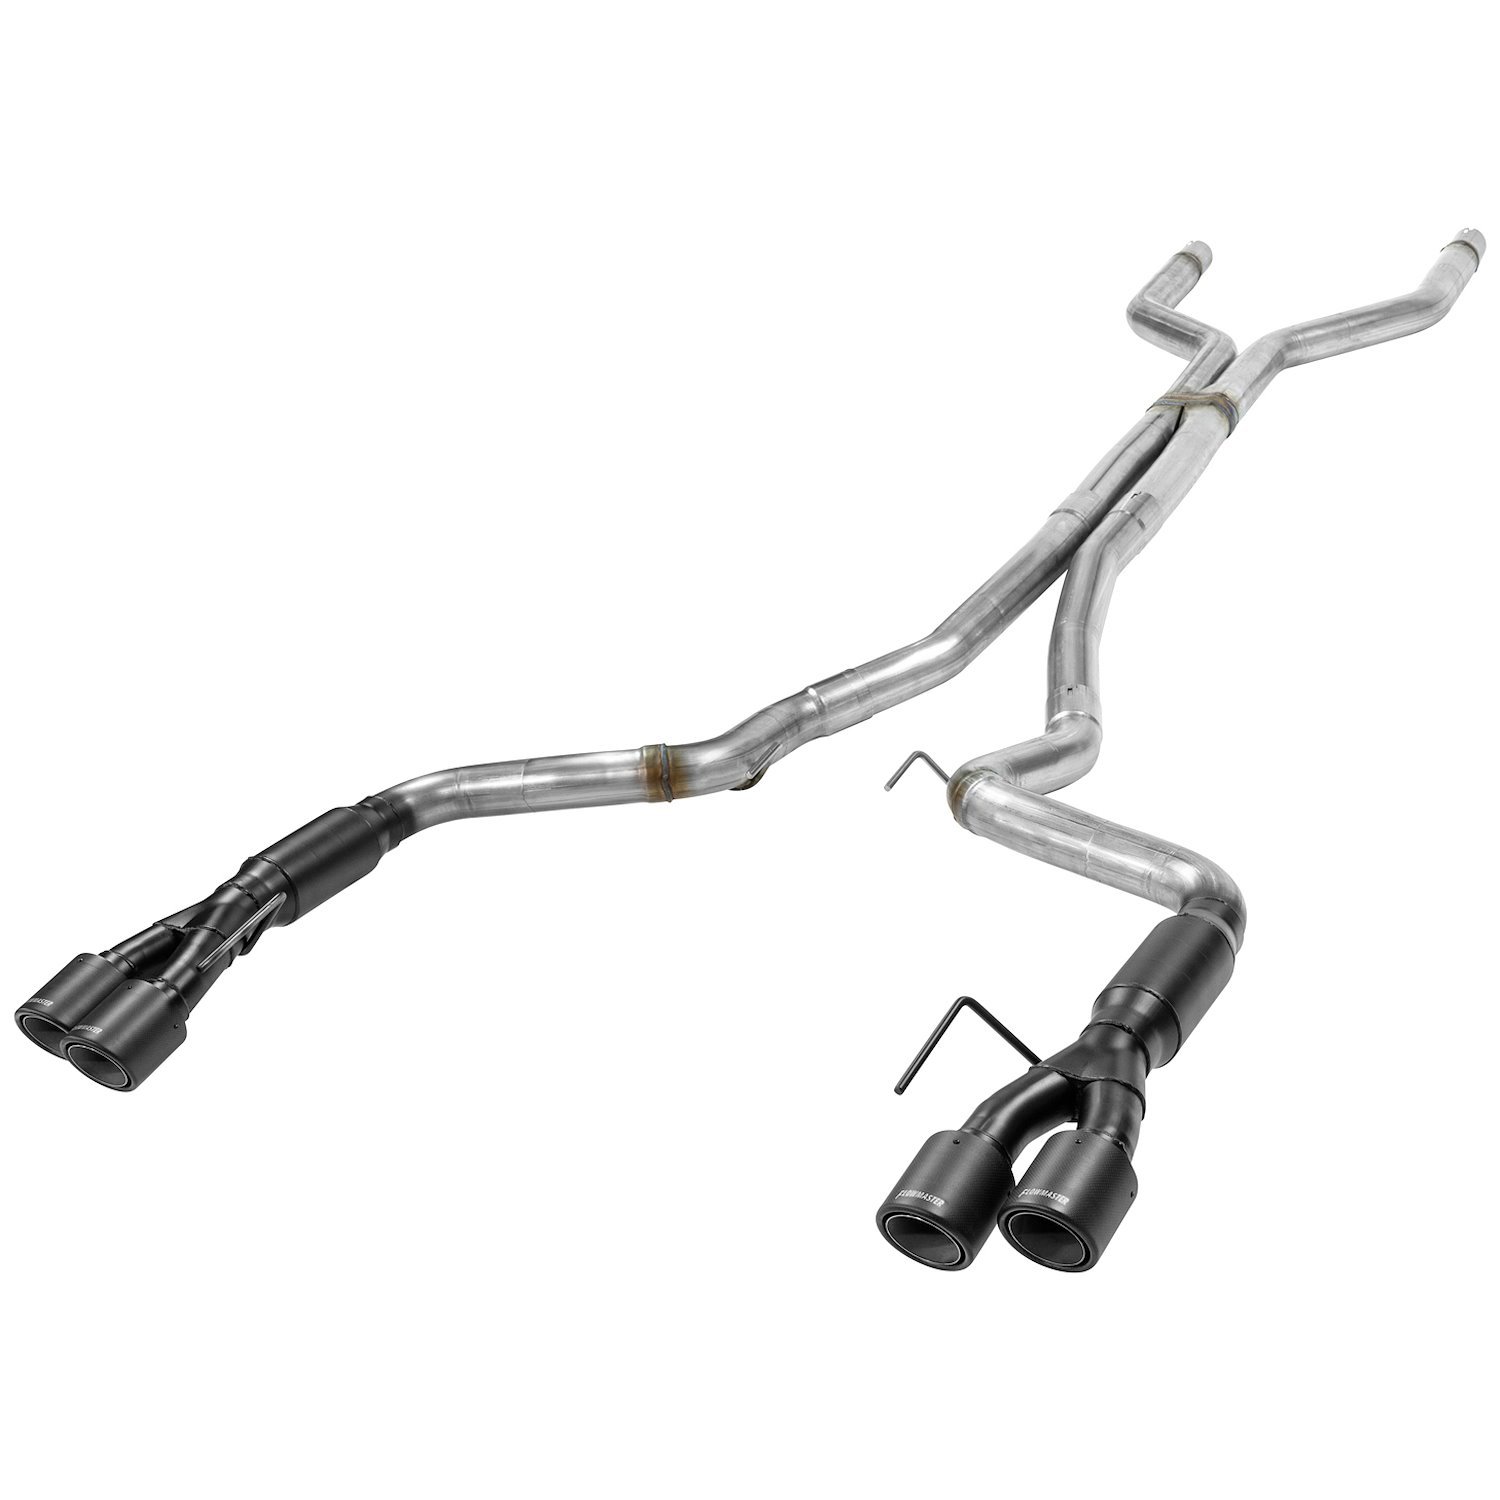 Outlaw Series Cat-Back Exhaust System 2018 Mustang GT 5.0L V8